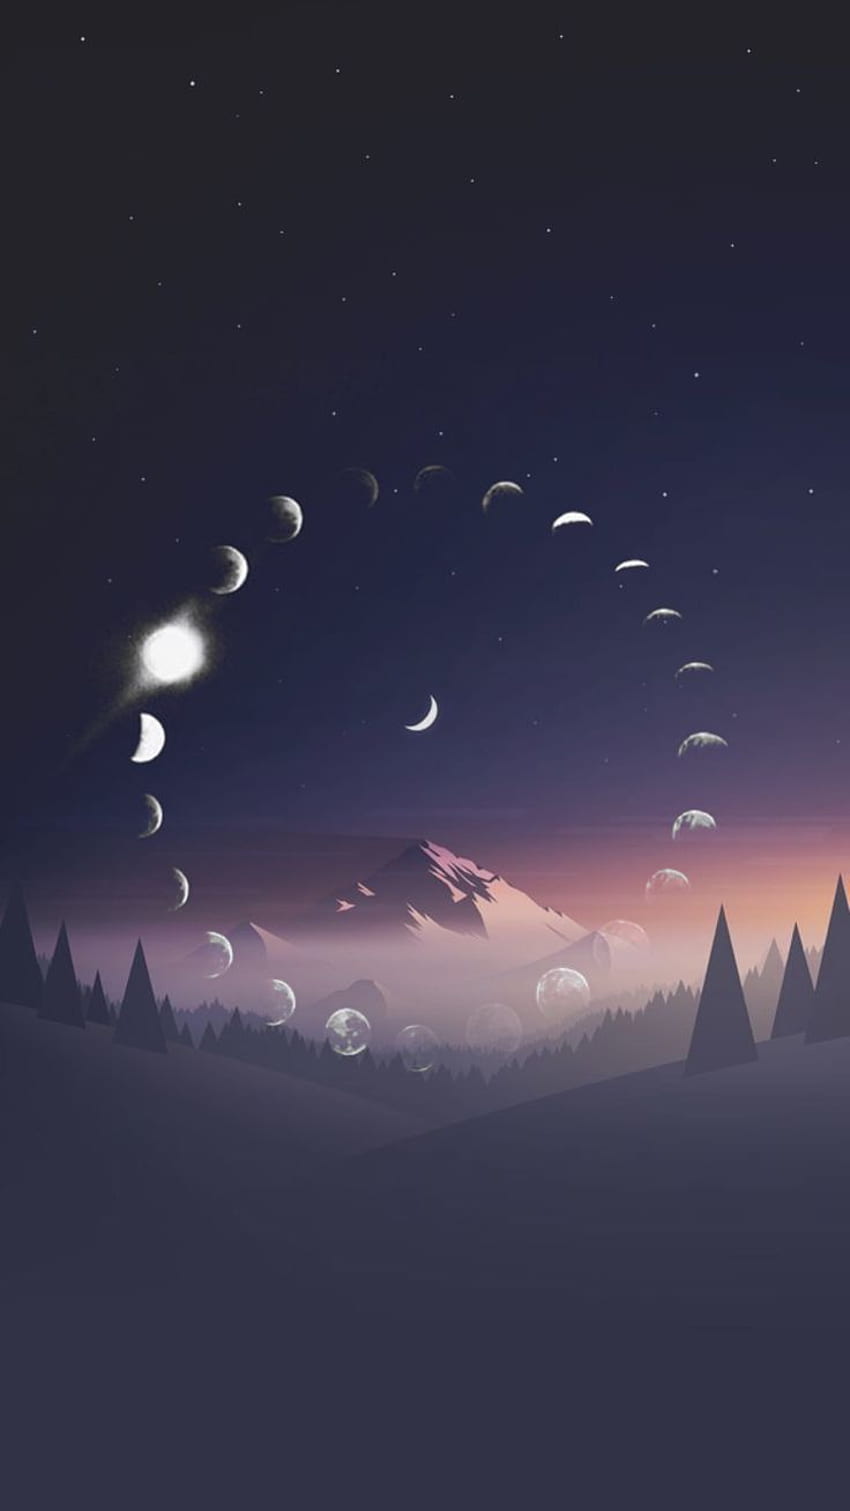 Illustration Moon moon phases, mountain forest night illustration art iPhone – Best Illustration Art, Moon Cycle HD phone wallpaper